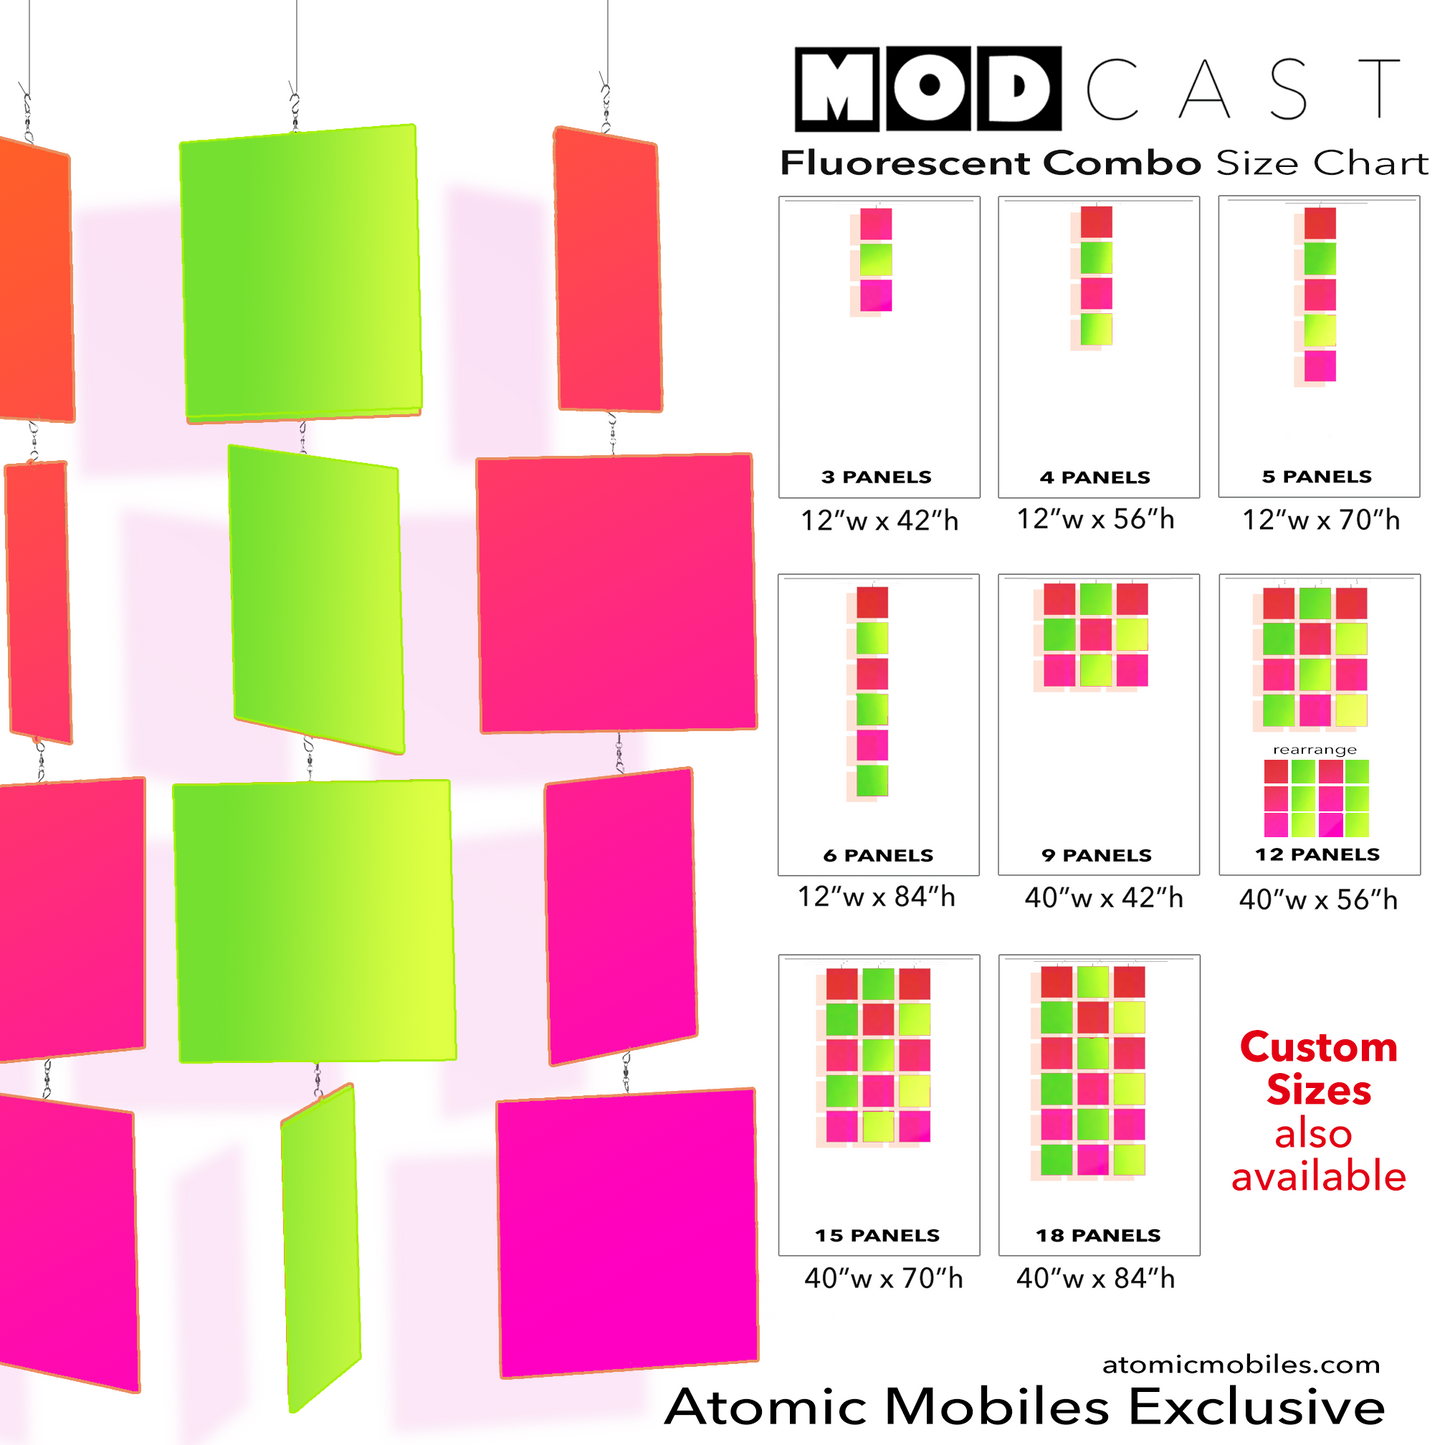 Modernist MODcast mid century modern style kinetic hanging art mobile for home decor in clear color fluorescent Hot Pink and Green acrylic plexiglass - handmade in Los Angeles California by AtomicMobiles.com